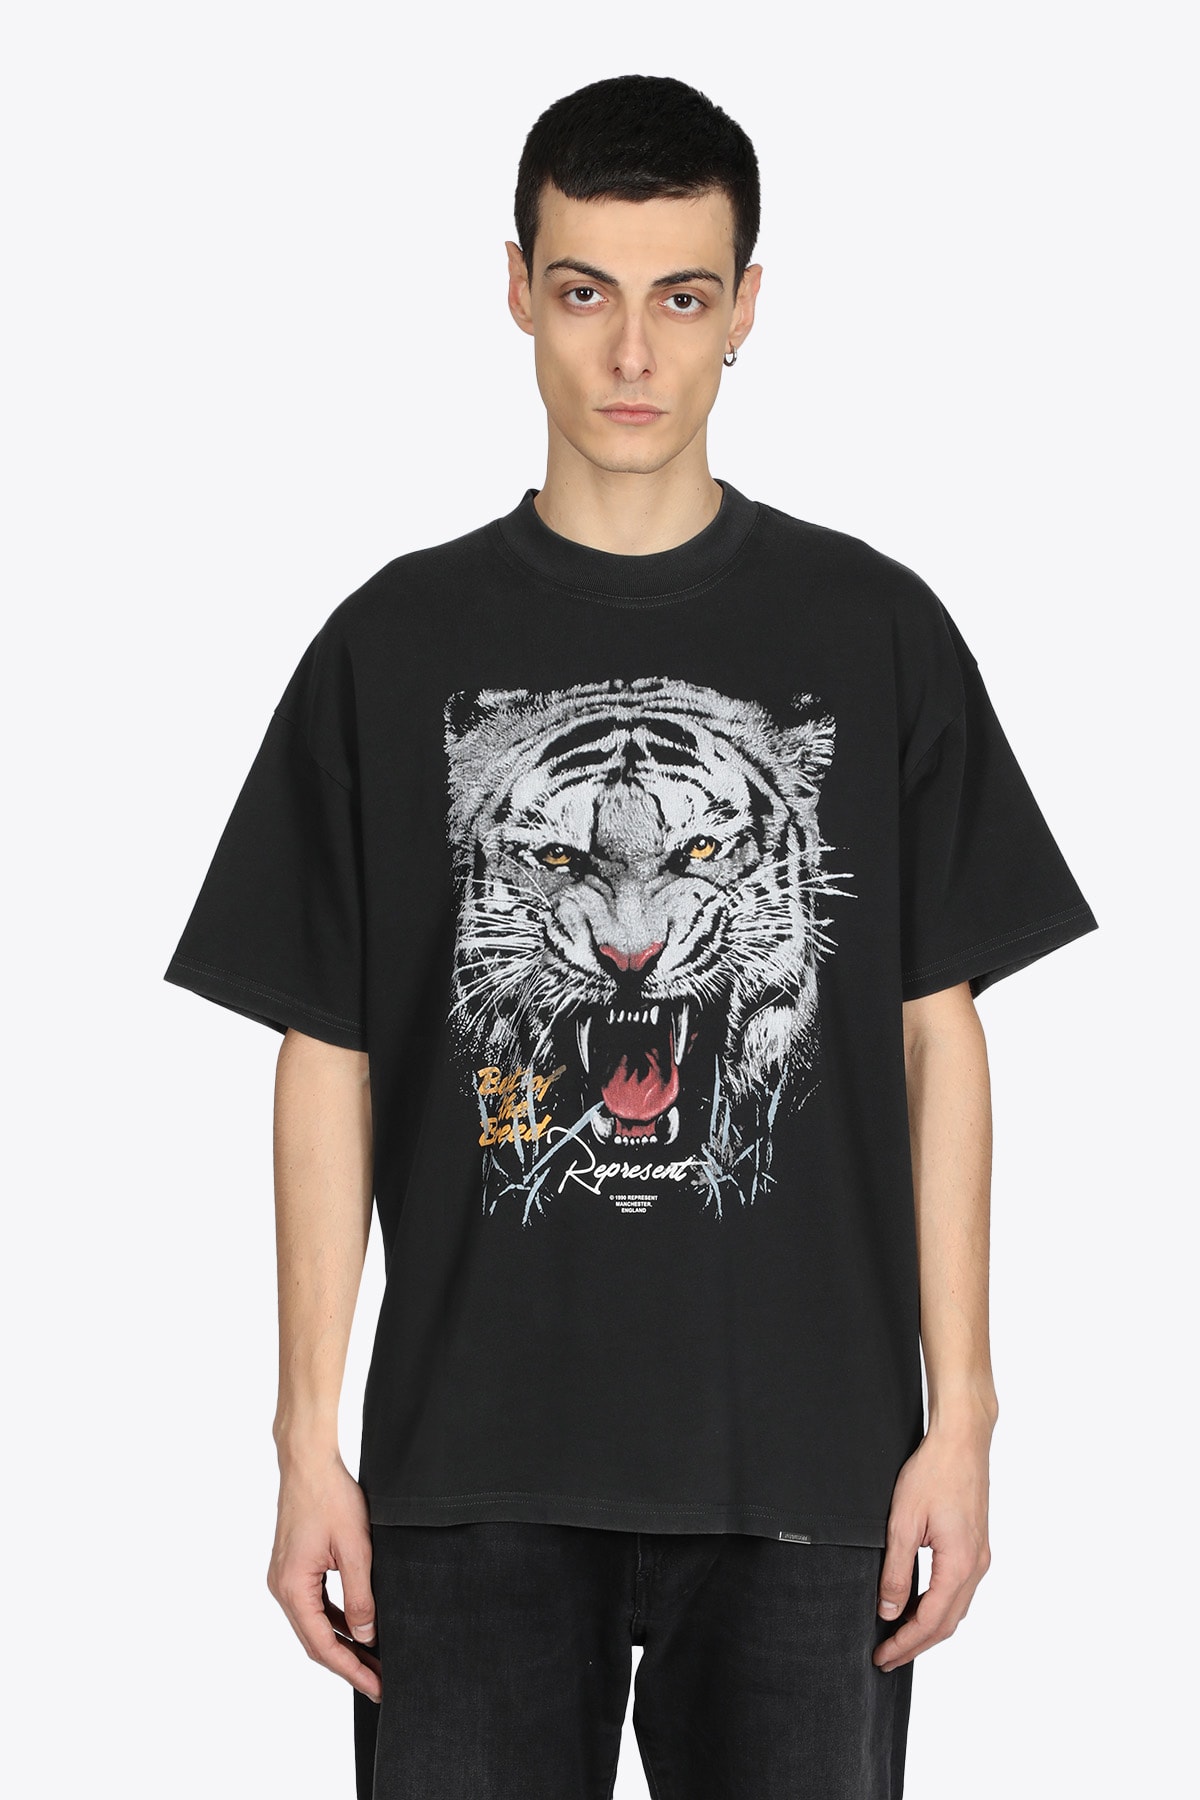 REPRESENT Best Of The Breed T-shirt Washed black cotton t-shirt with tiger print - Best of the breed t-shirt